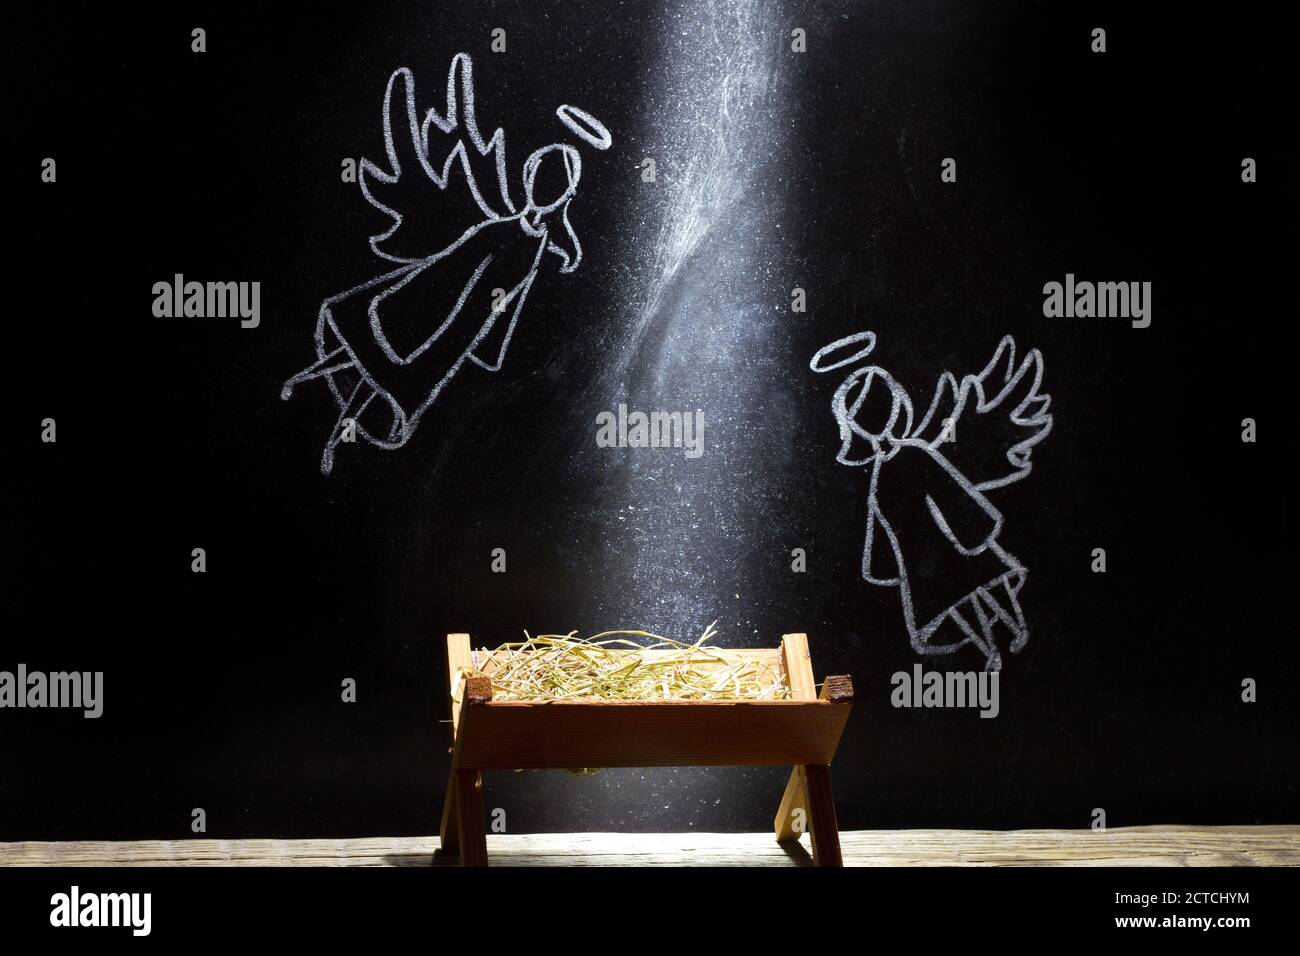 Birth of Jesus, manger and angels on blackboard abstract christmas nativity scene Stock Photo